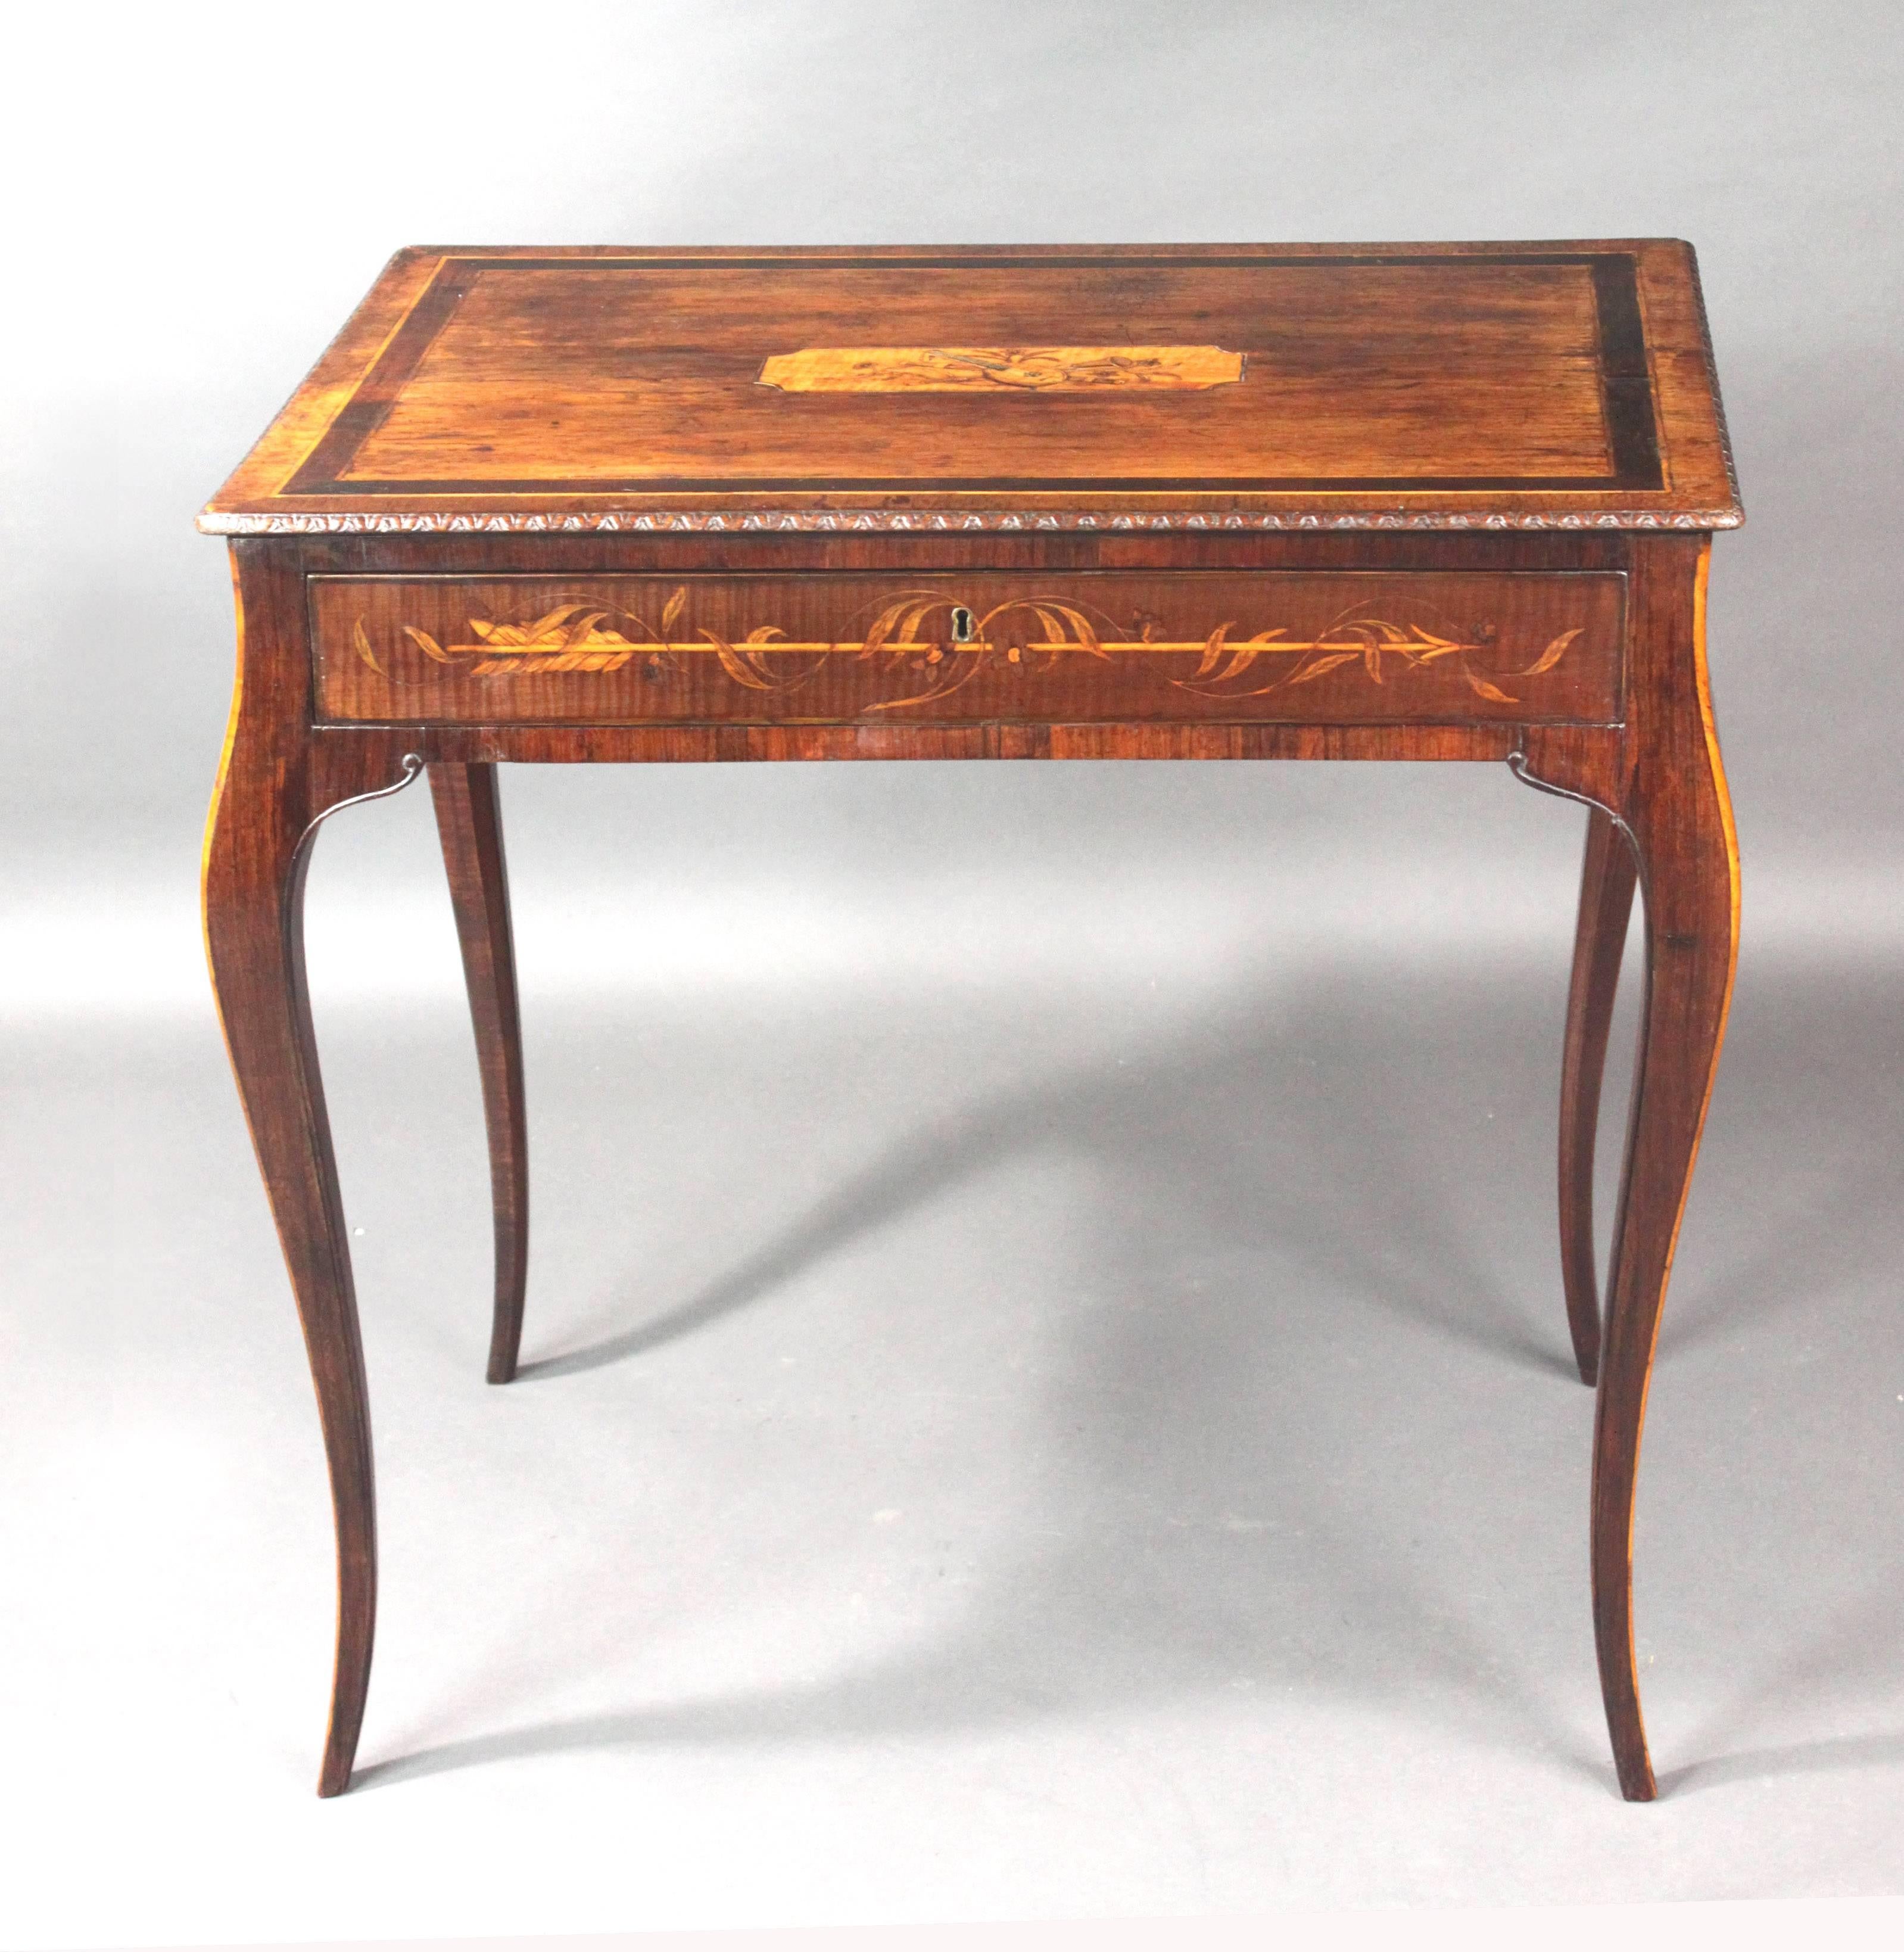 A fine and rare George III centre table in the manner of Ince & Mayhew. In harewood with fine marquetry inlay. The shape is similar to some of the serpentine commodes of the 18th century.


